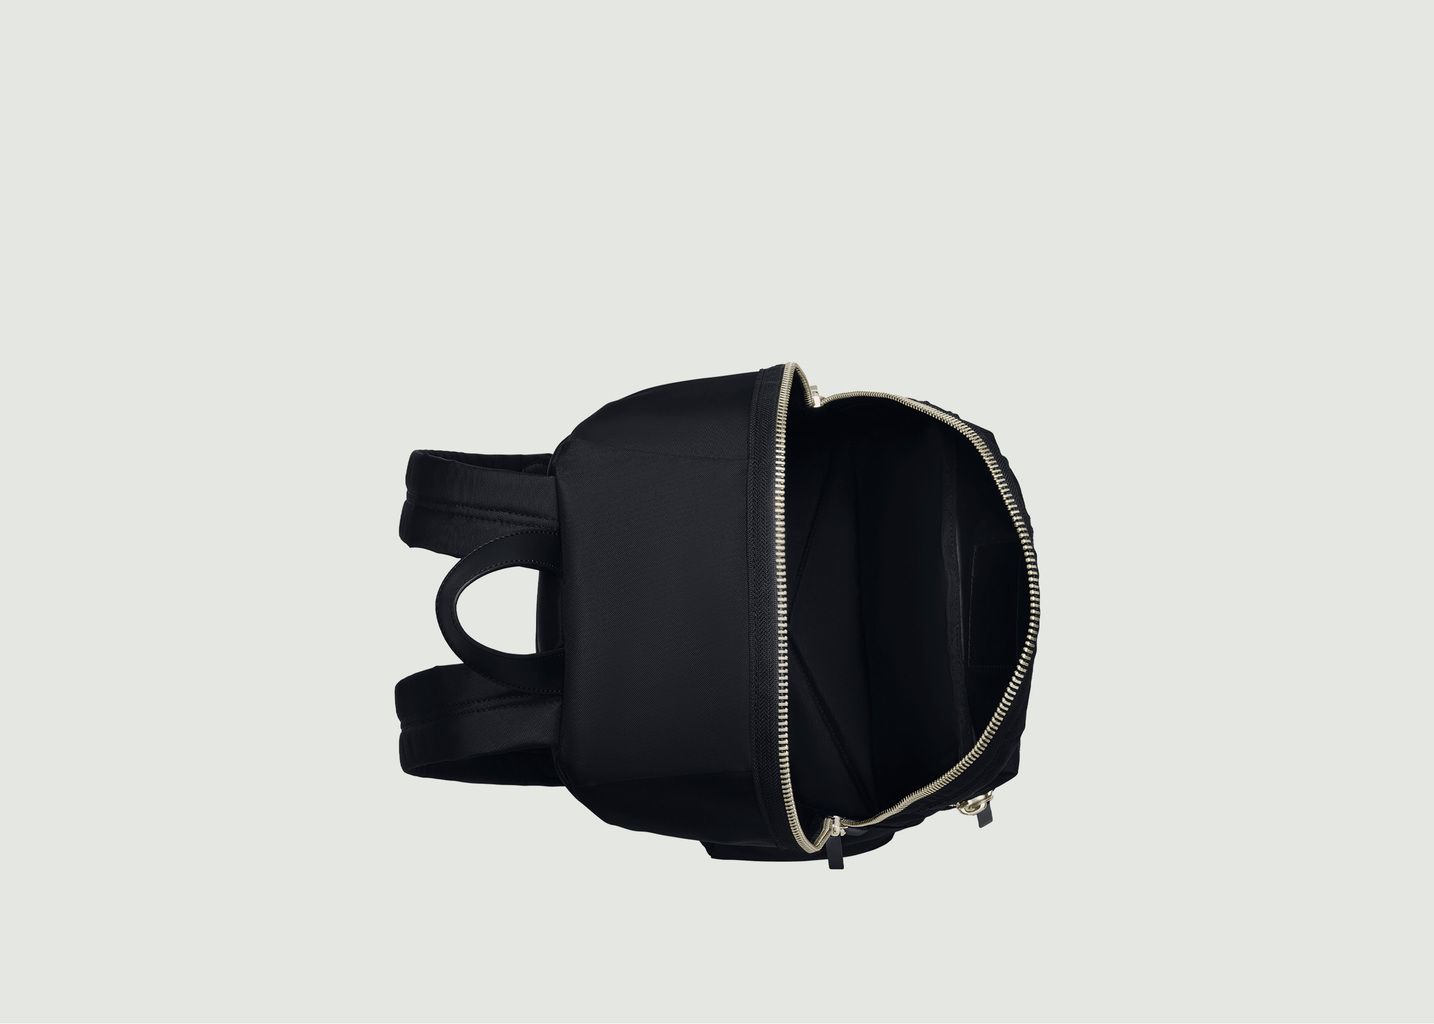 Rucksack The Large Backpack - Marc Jacobs